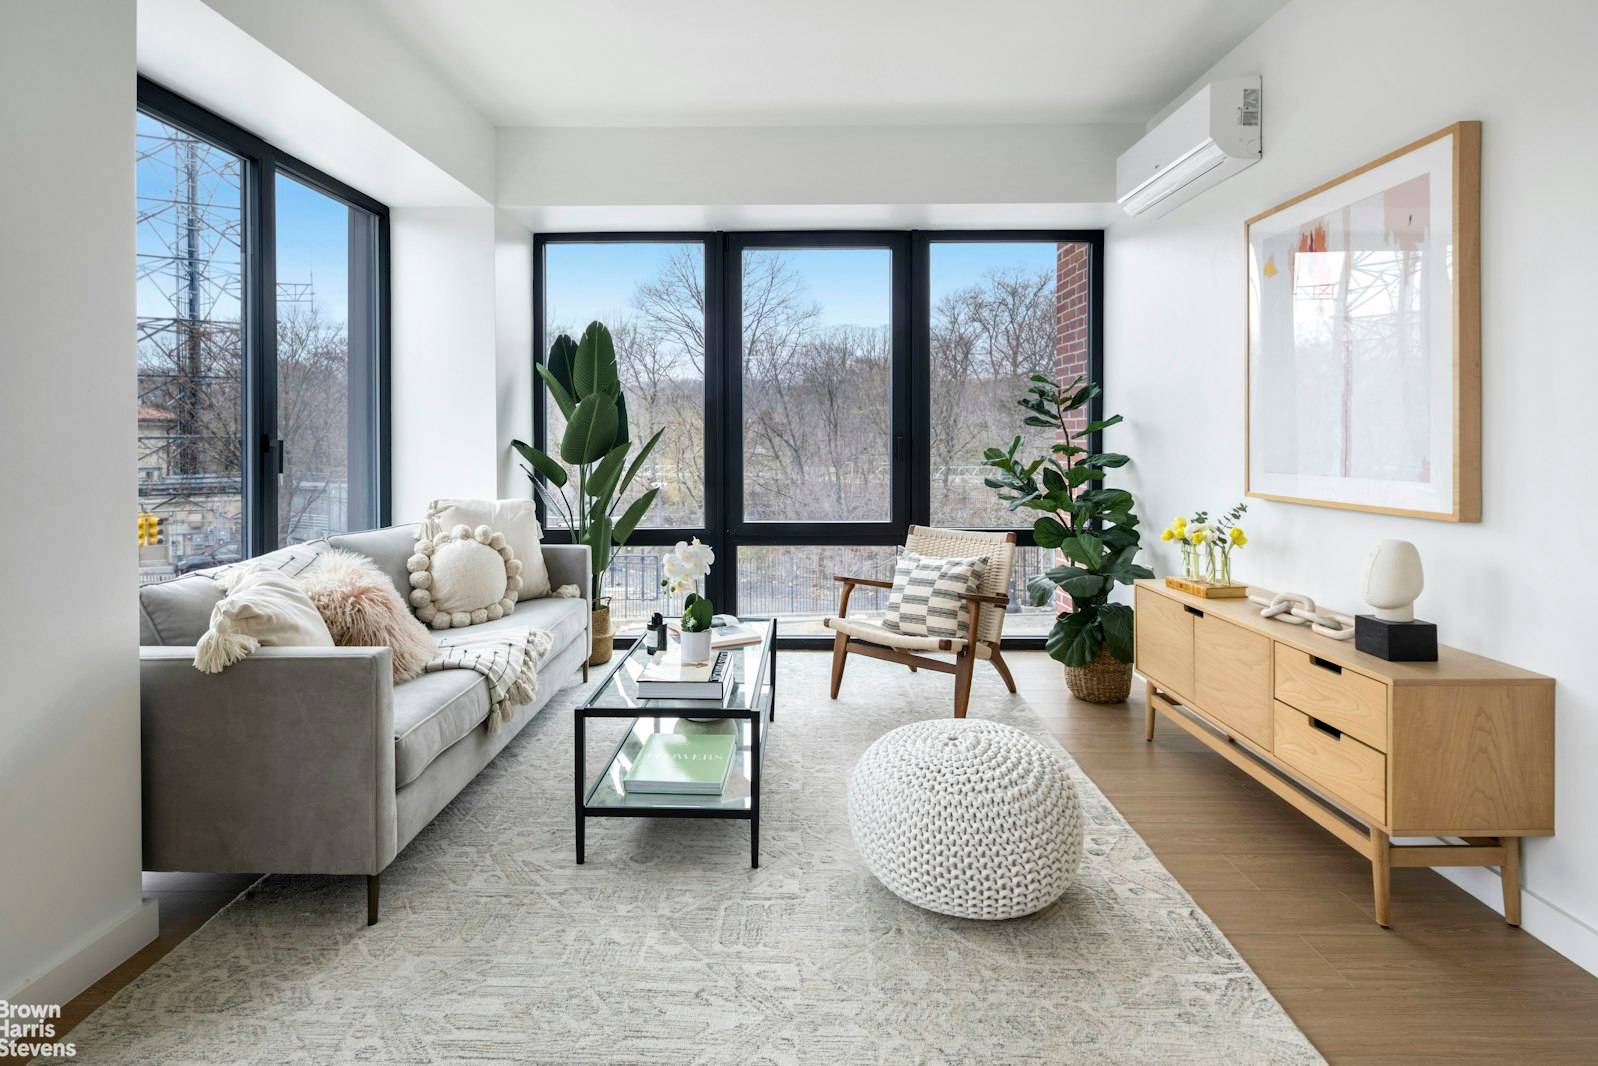 Welcome to One Sullivan Place, a newly constructed luxury rental building located at the cross roads between historic Crown Heights and trendy Prospect Lefferts Garden.